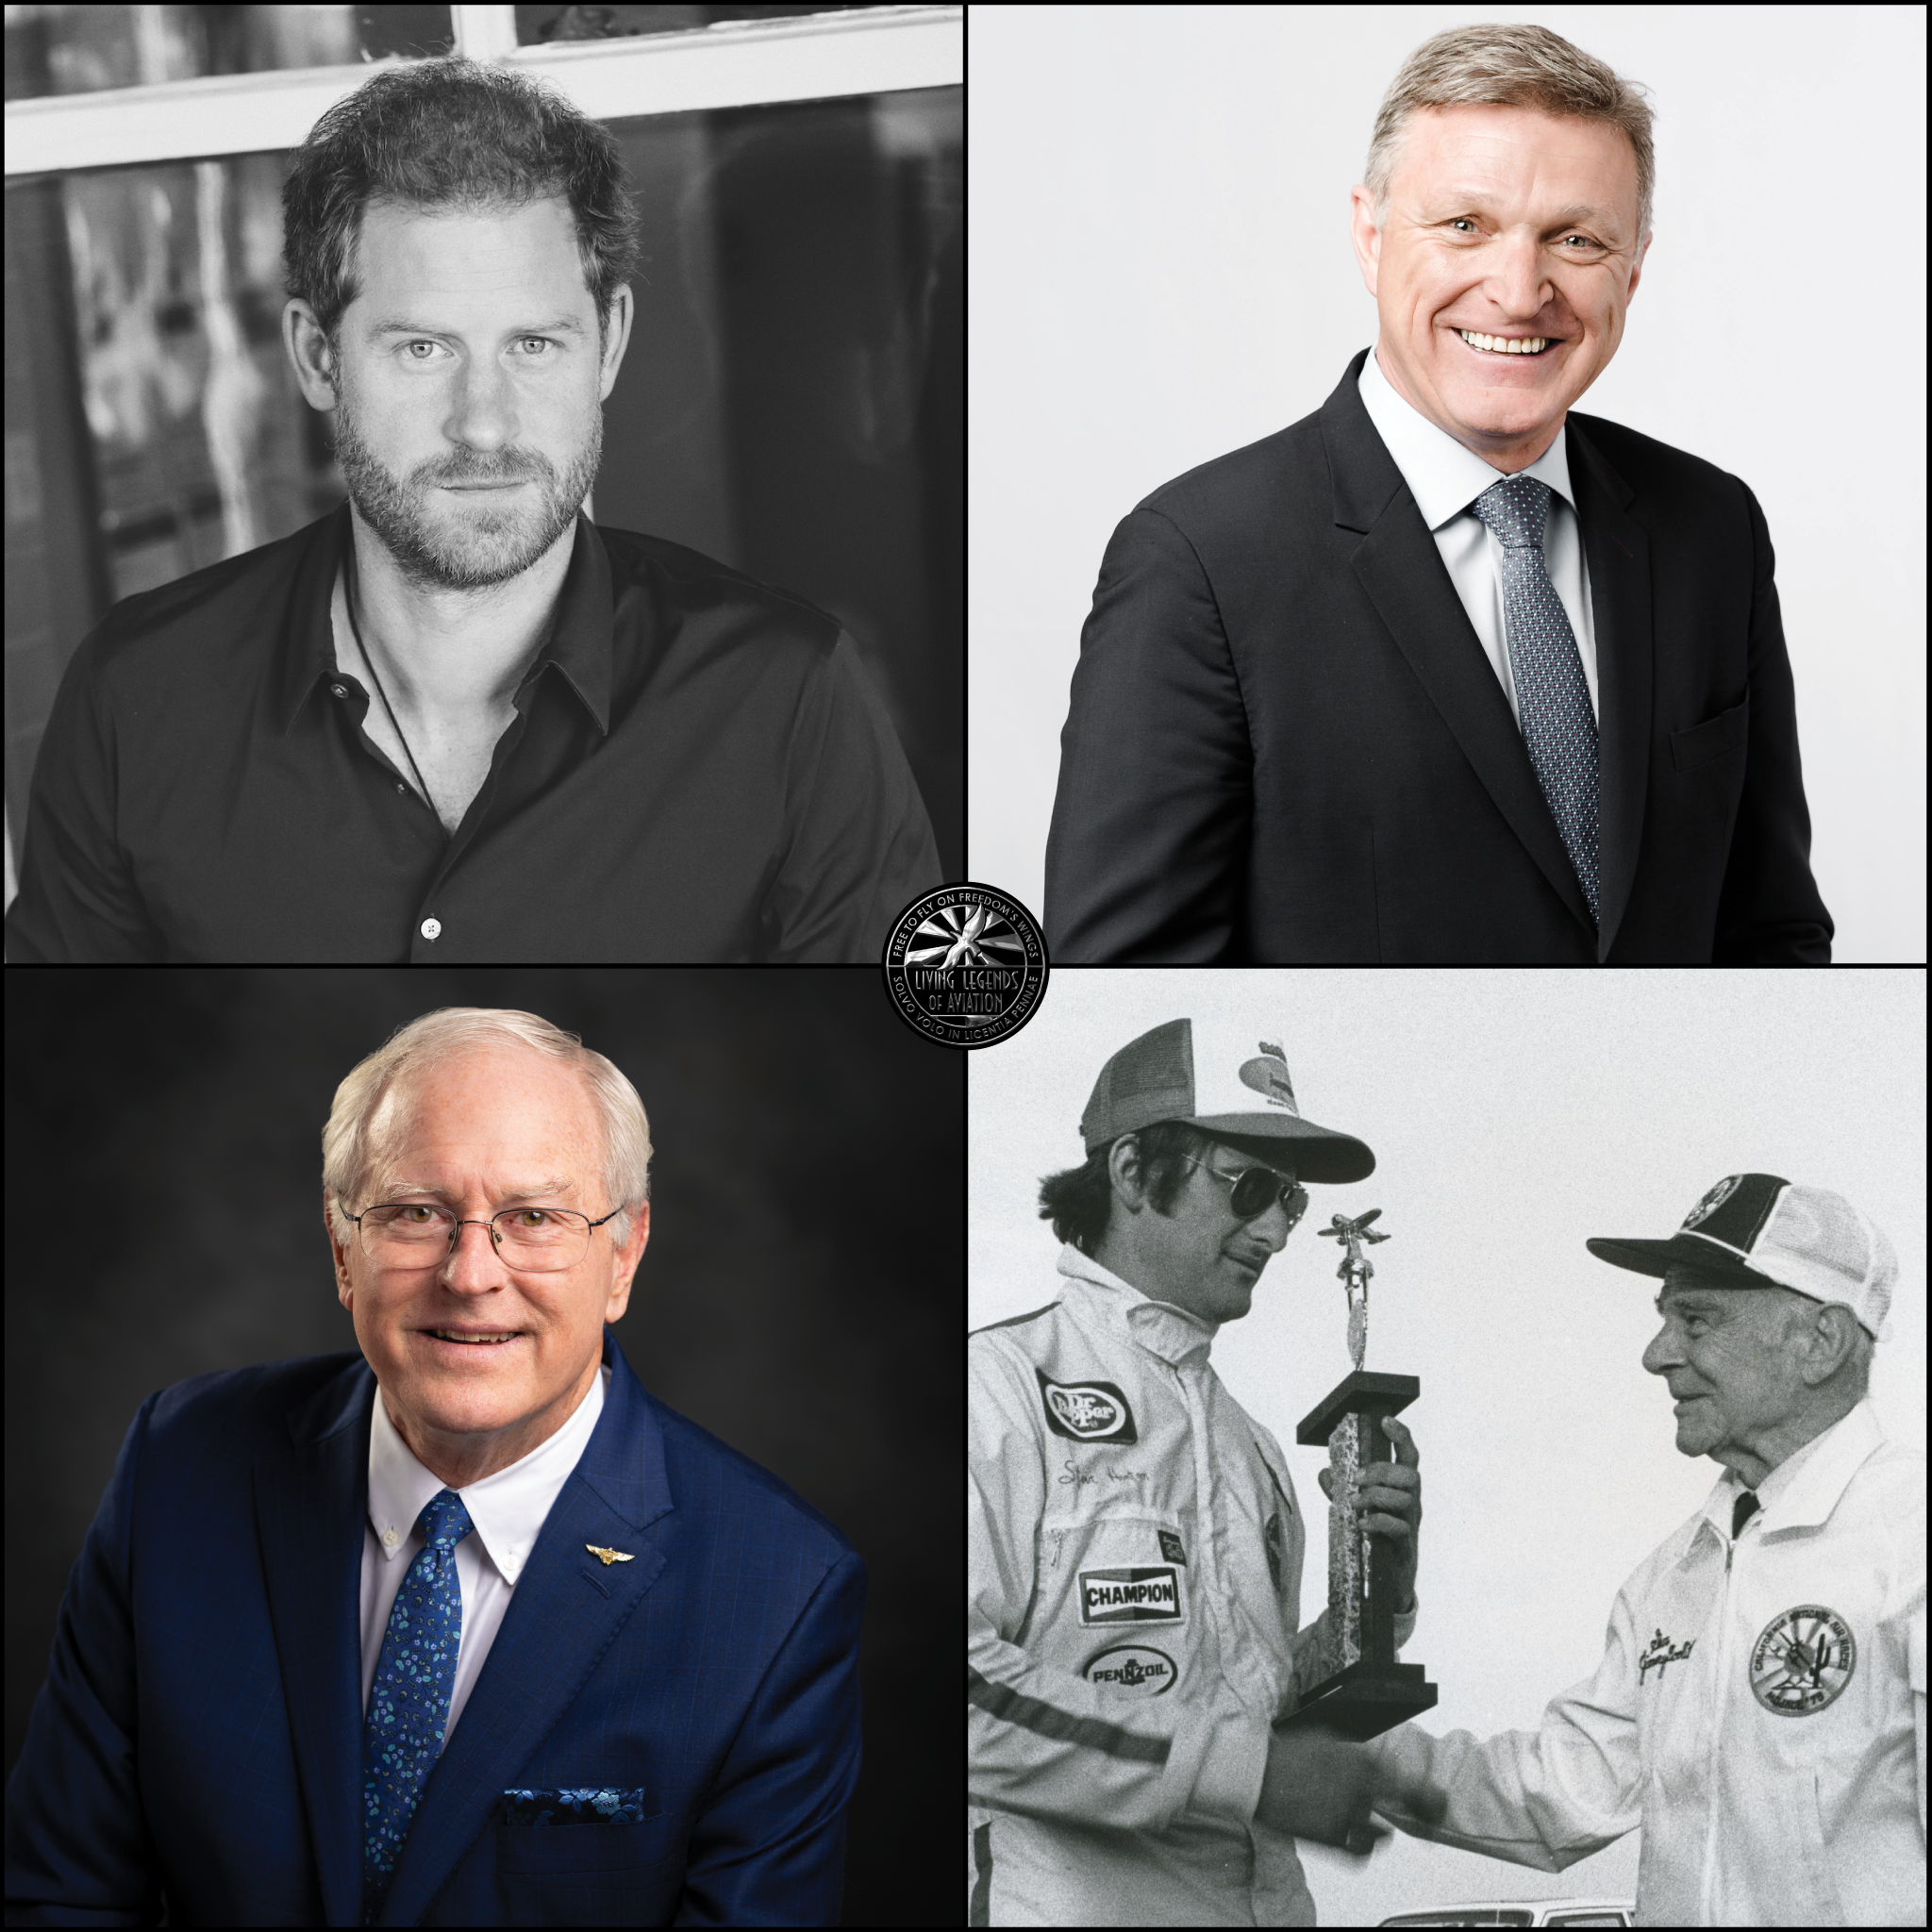 Prince Harry, The Duke of Sussex to be Inducted into the Living Legends of Aviation Alongside Other Remarkable Aviators Fred George, Marc Parent, and Steve Hinton